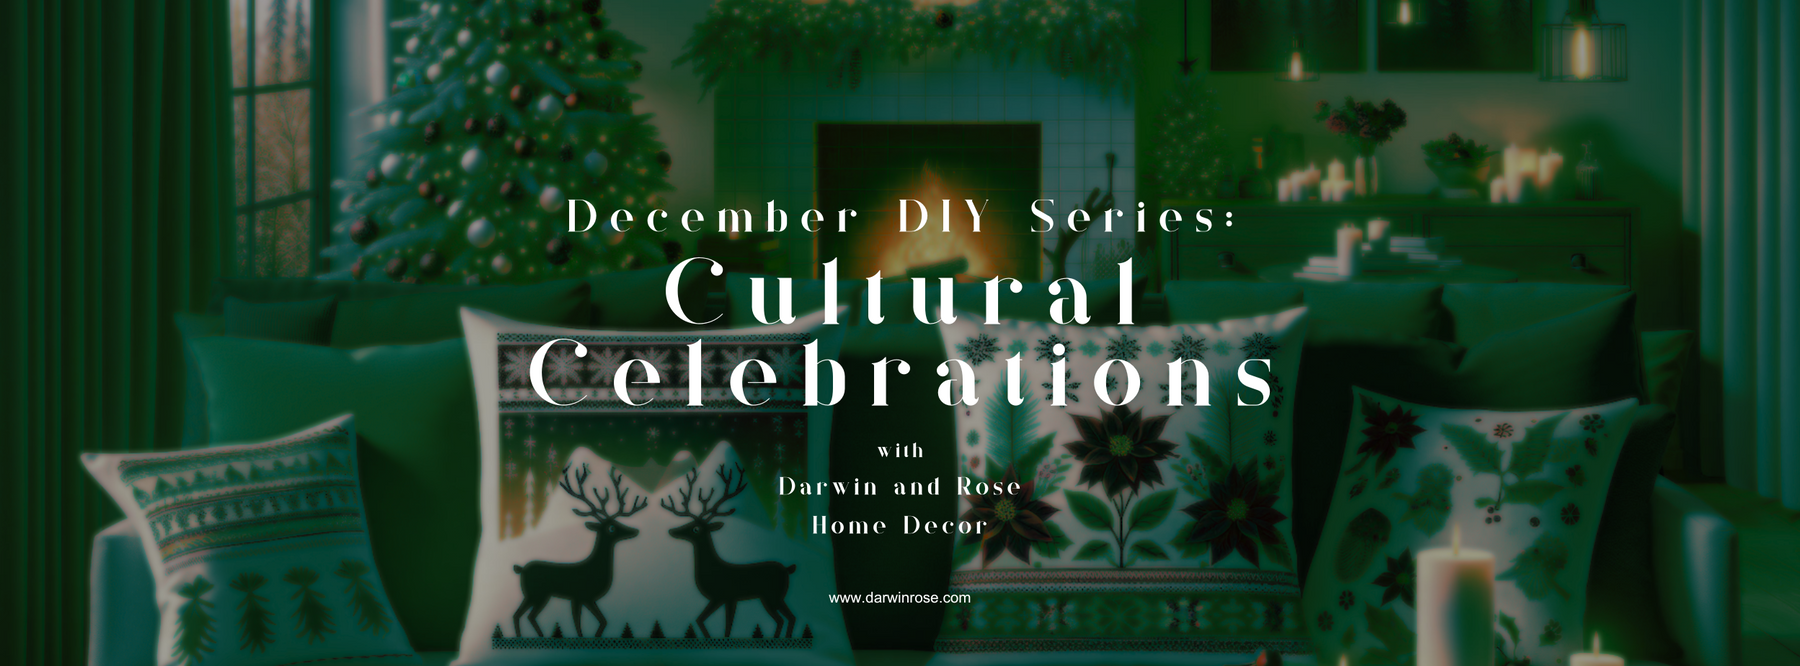 This promotional banner showcases a holiday-themed living room with a decorated Christmas tree and fireplace, part of the "December DIY Series: Cultural Celebrations" by Darwin and Rose Home Decor. 